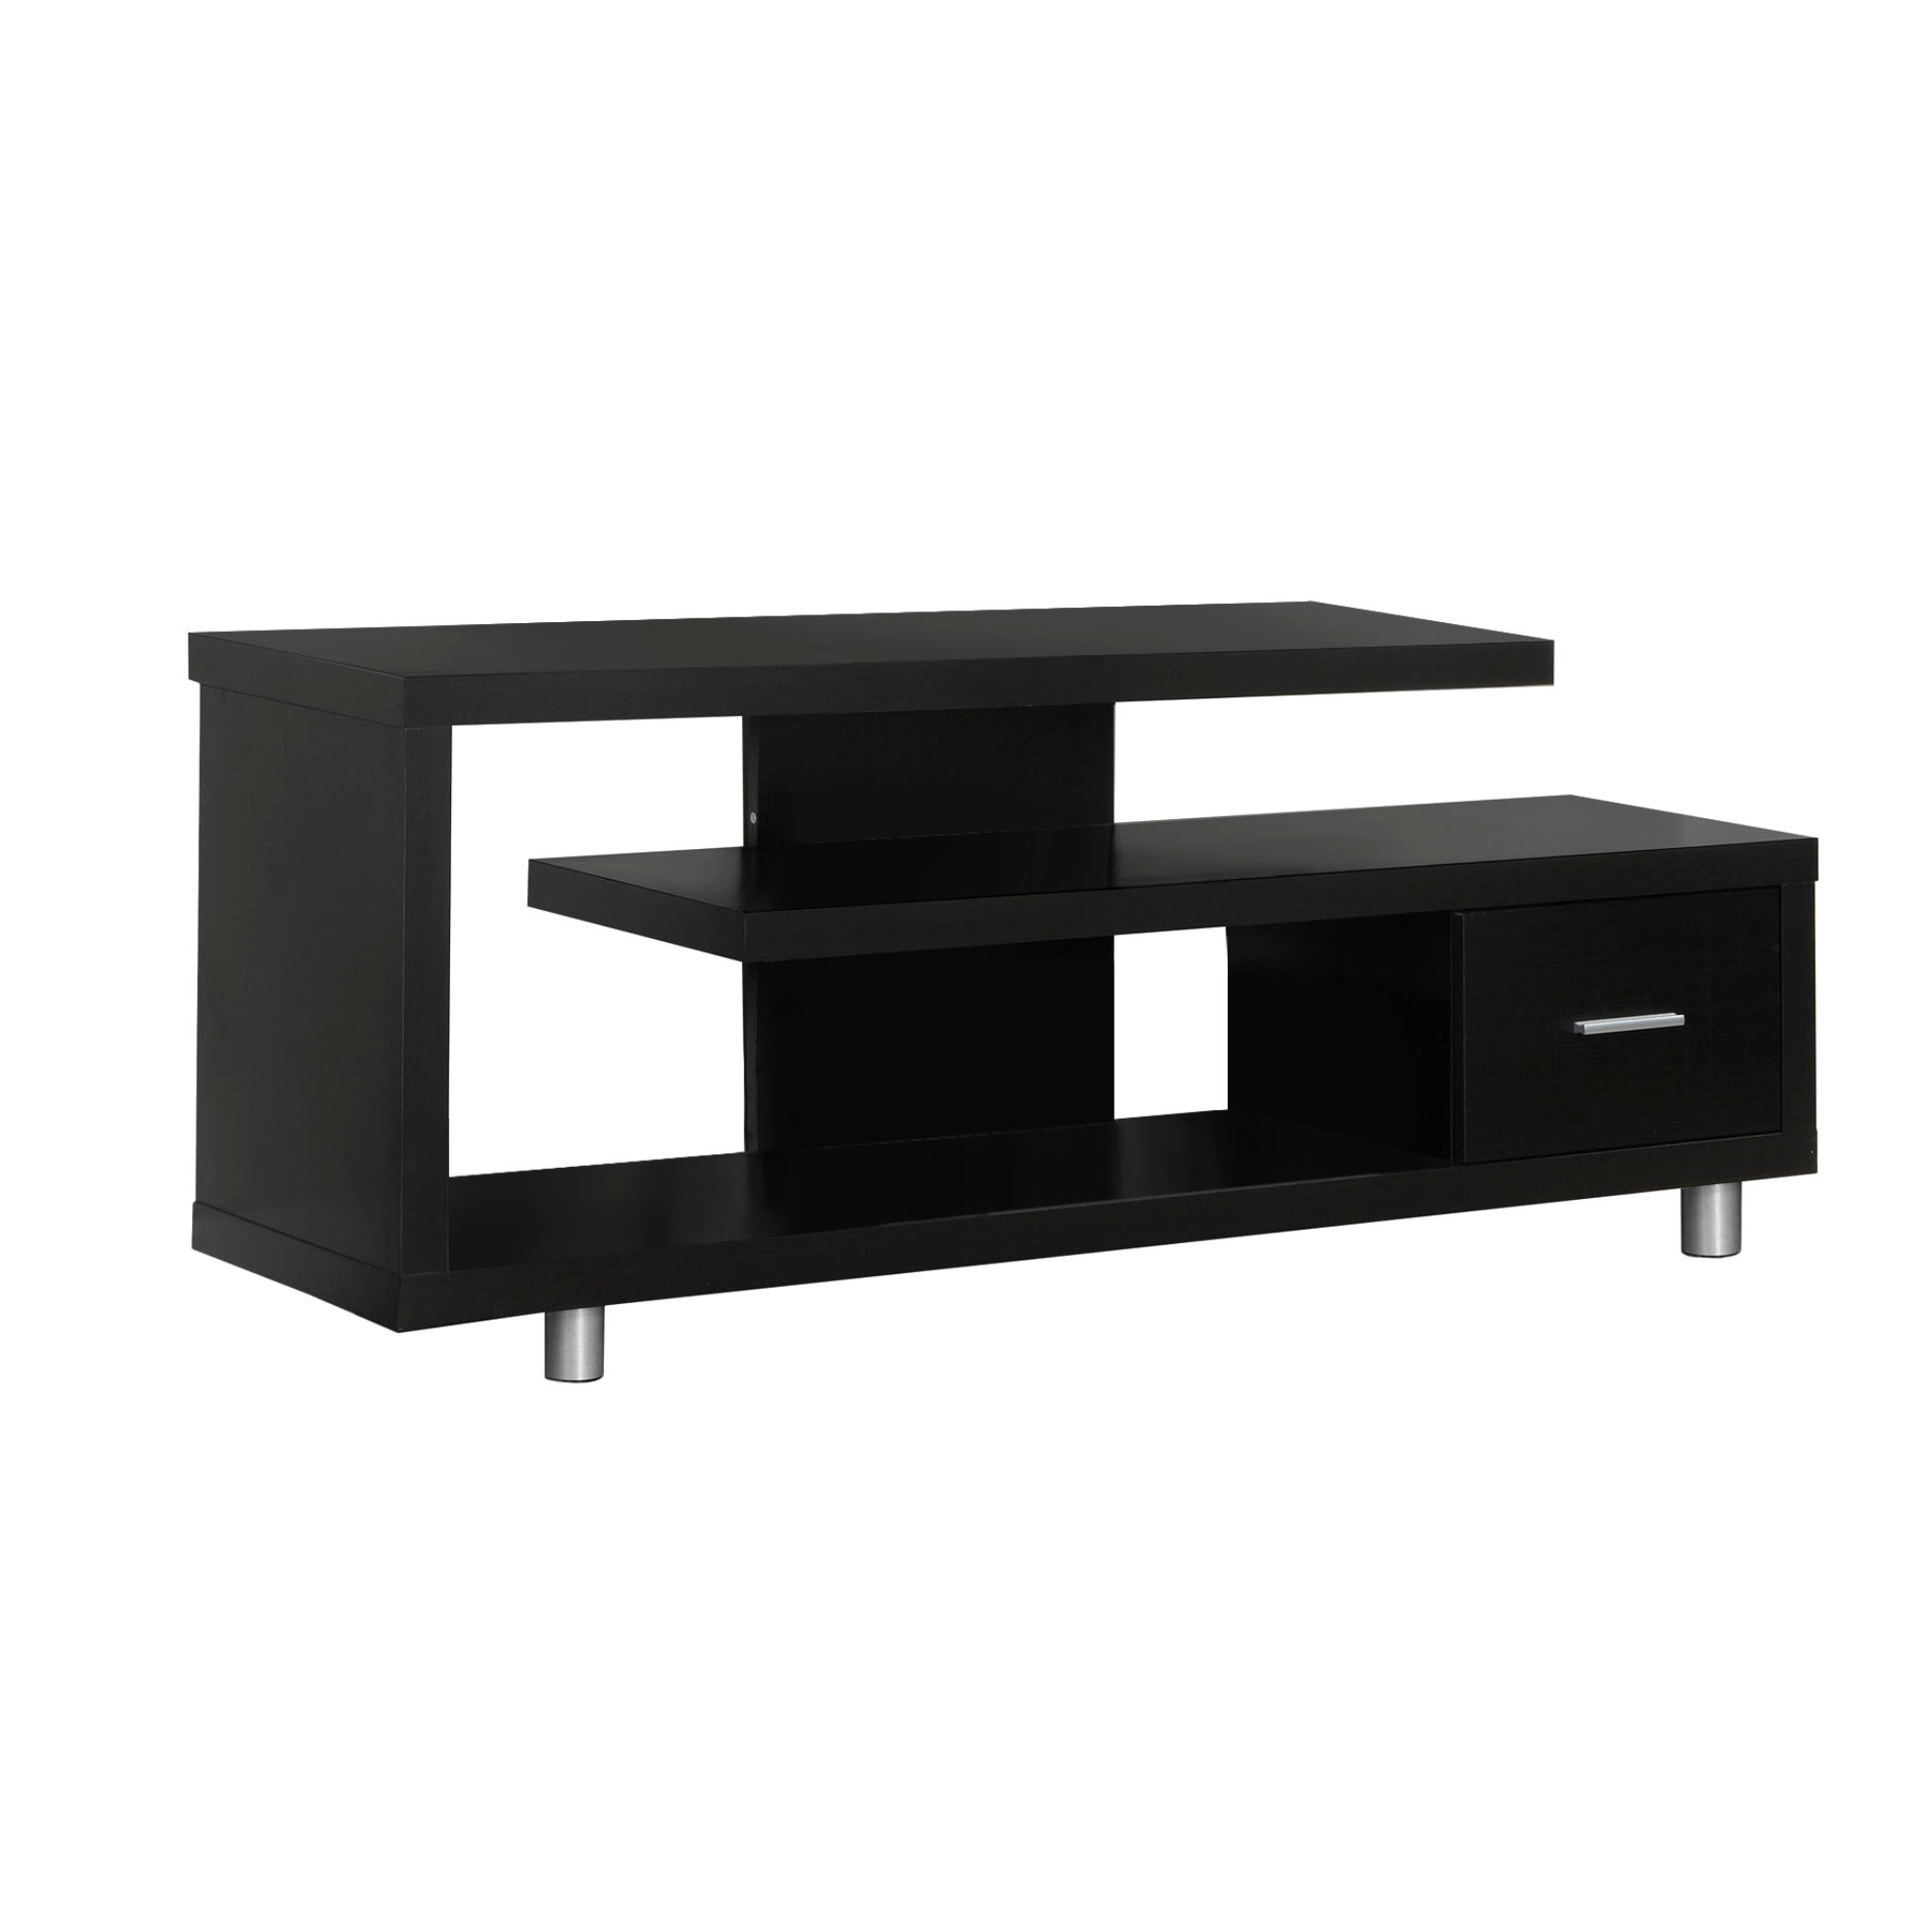 TV STAND - 60"L / ESPRESSO WITH 1 DRAWER